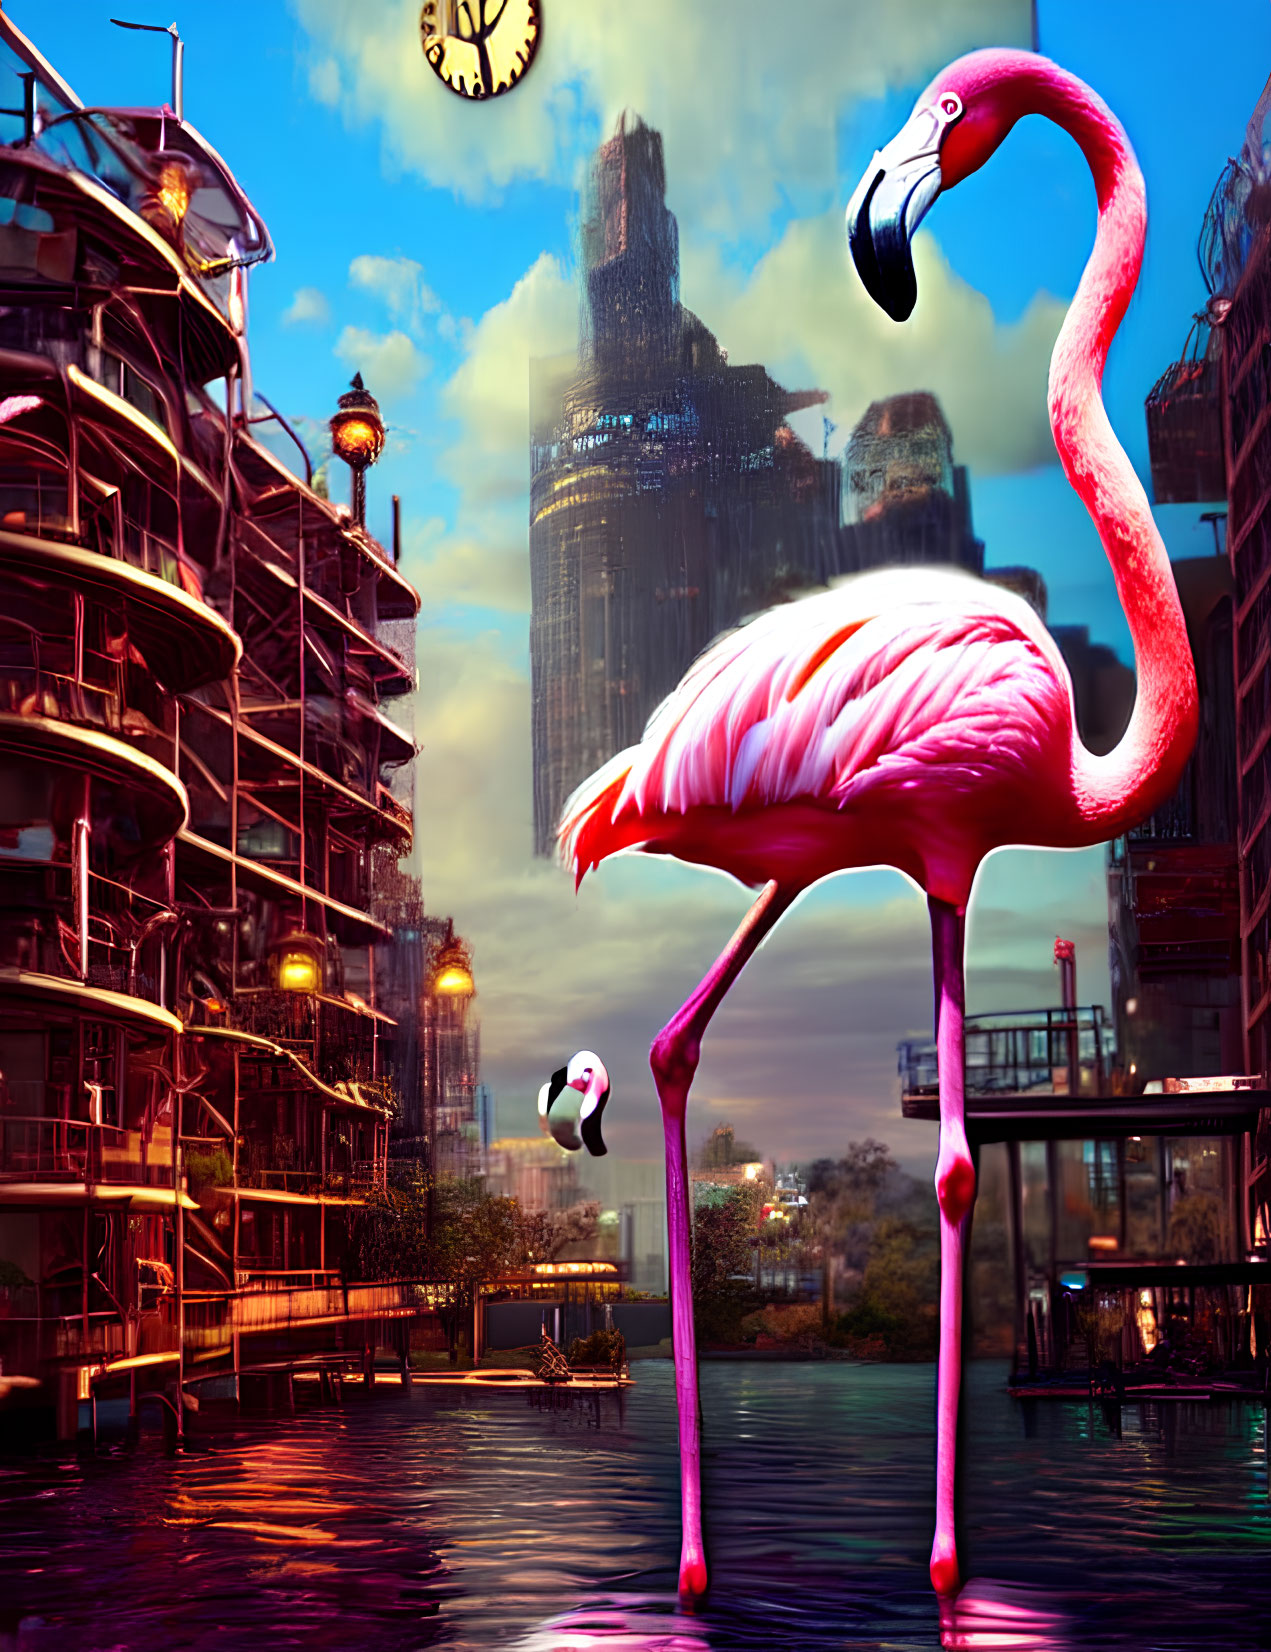 Colorful digital artwork: flamingo, surreal cityscape, water reflections, soccer ball